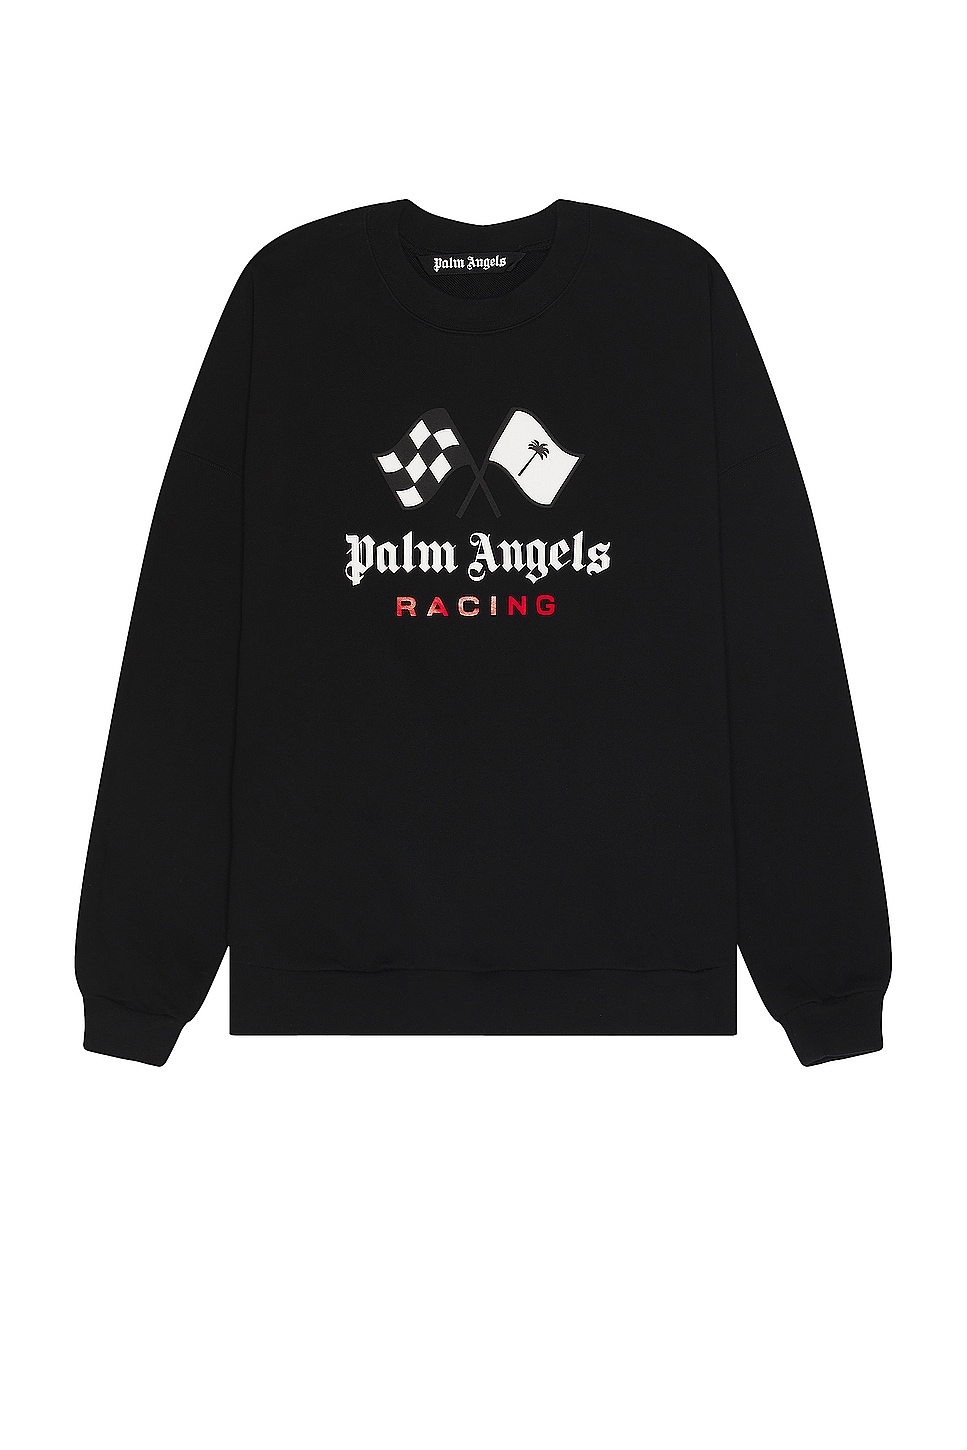 Palm Angels X Formula 1 Racing Sweater in Black